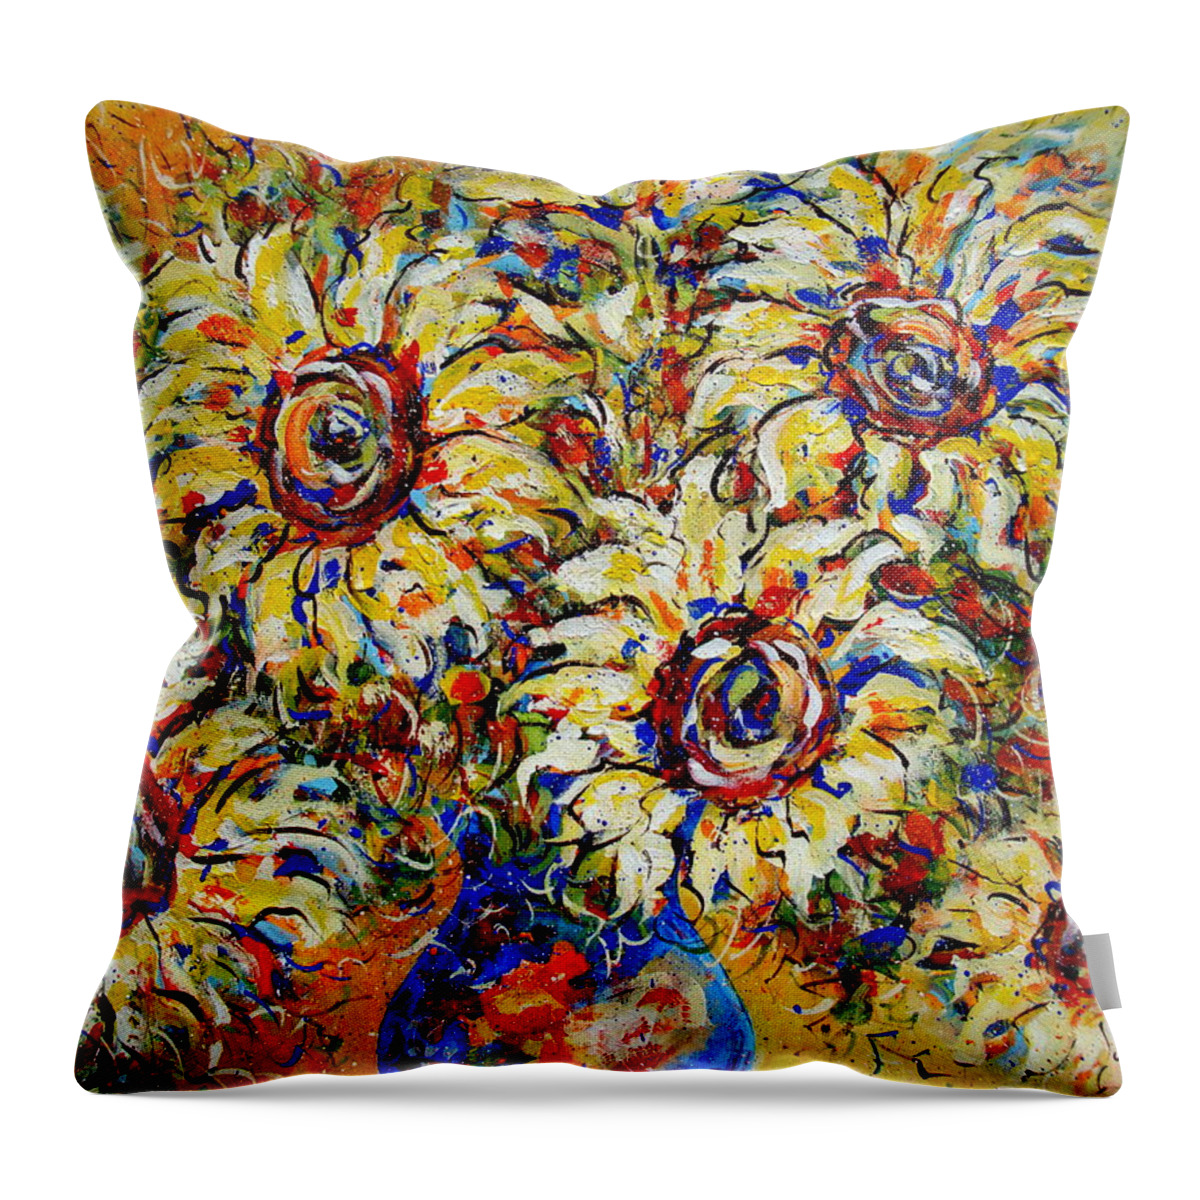 Flowers Throw Pillow featuring the painting Vibrant Sunflower Essence by Natalie Holland